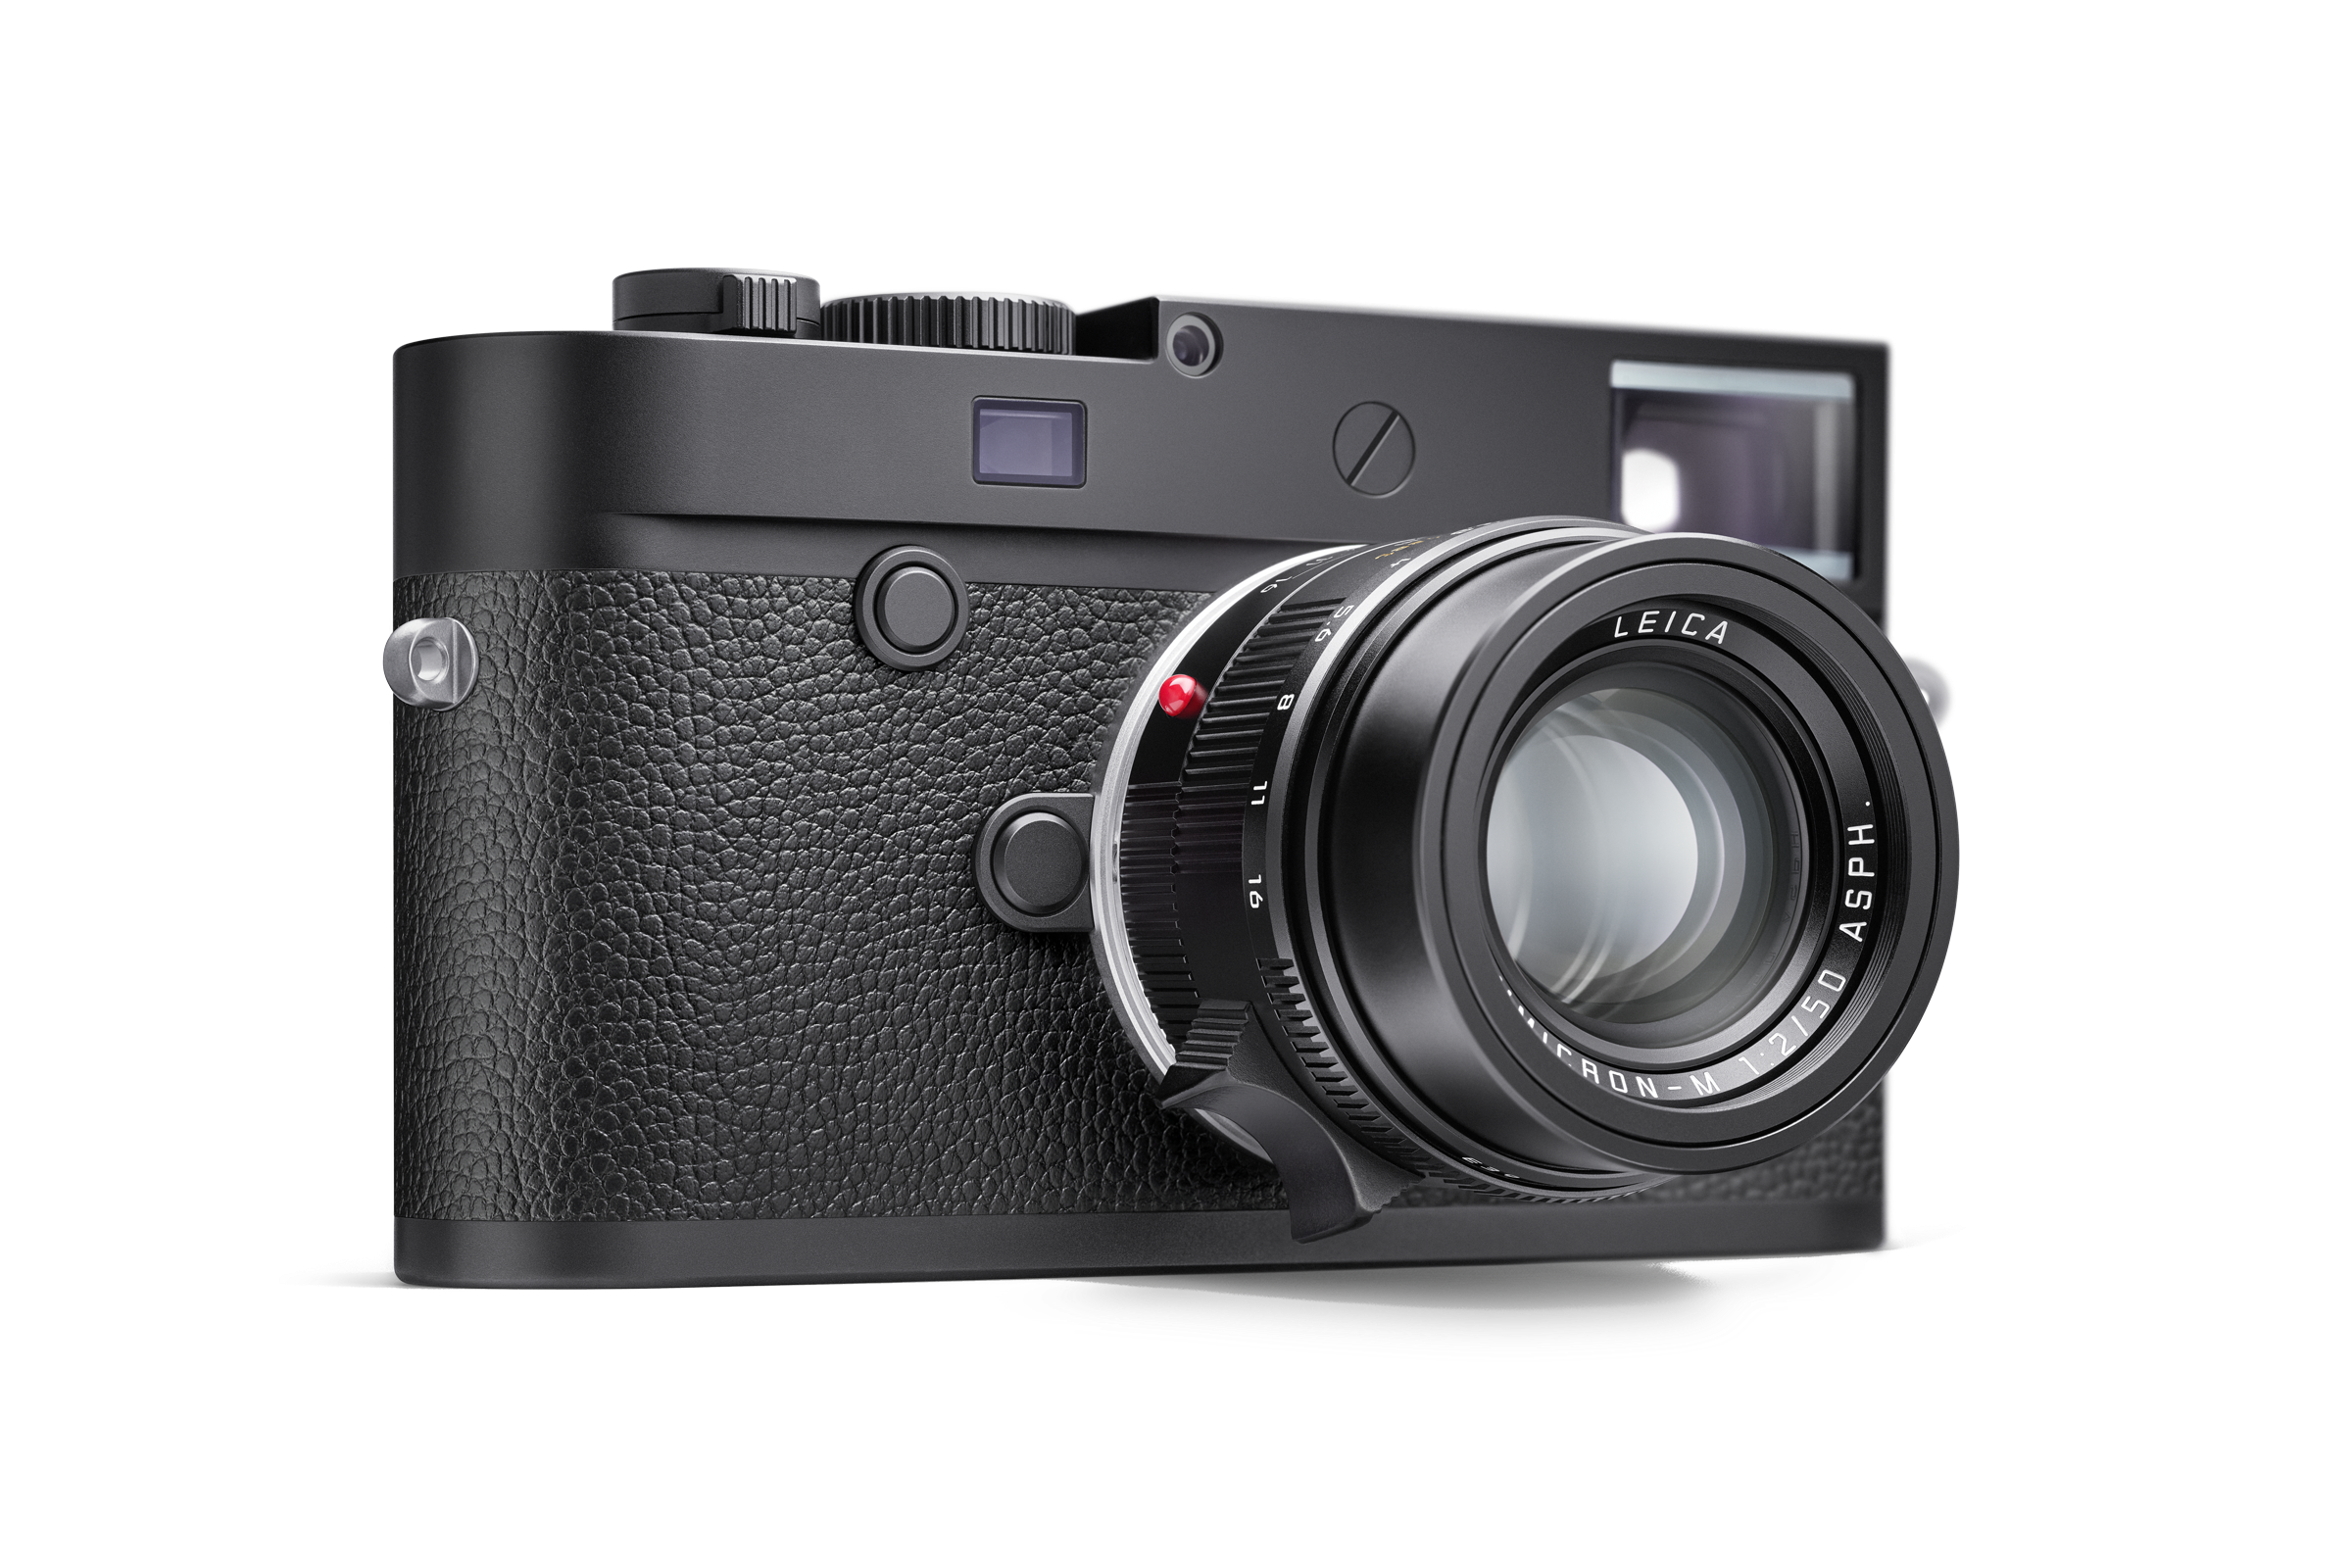 The new black-and-white Leica does things color cameras can’t